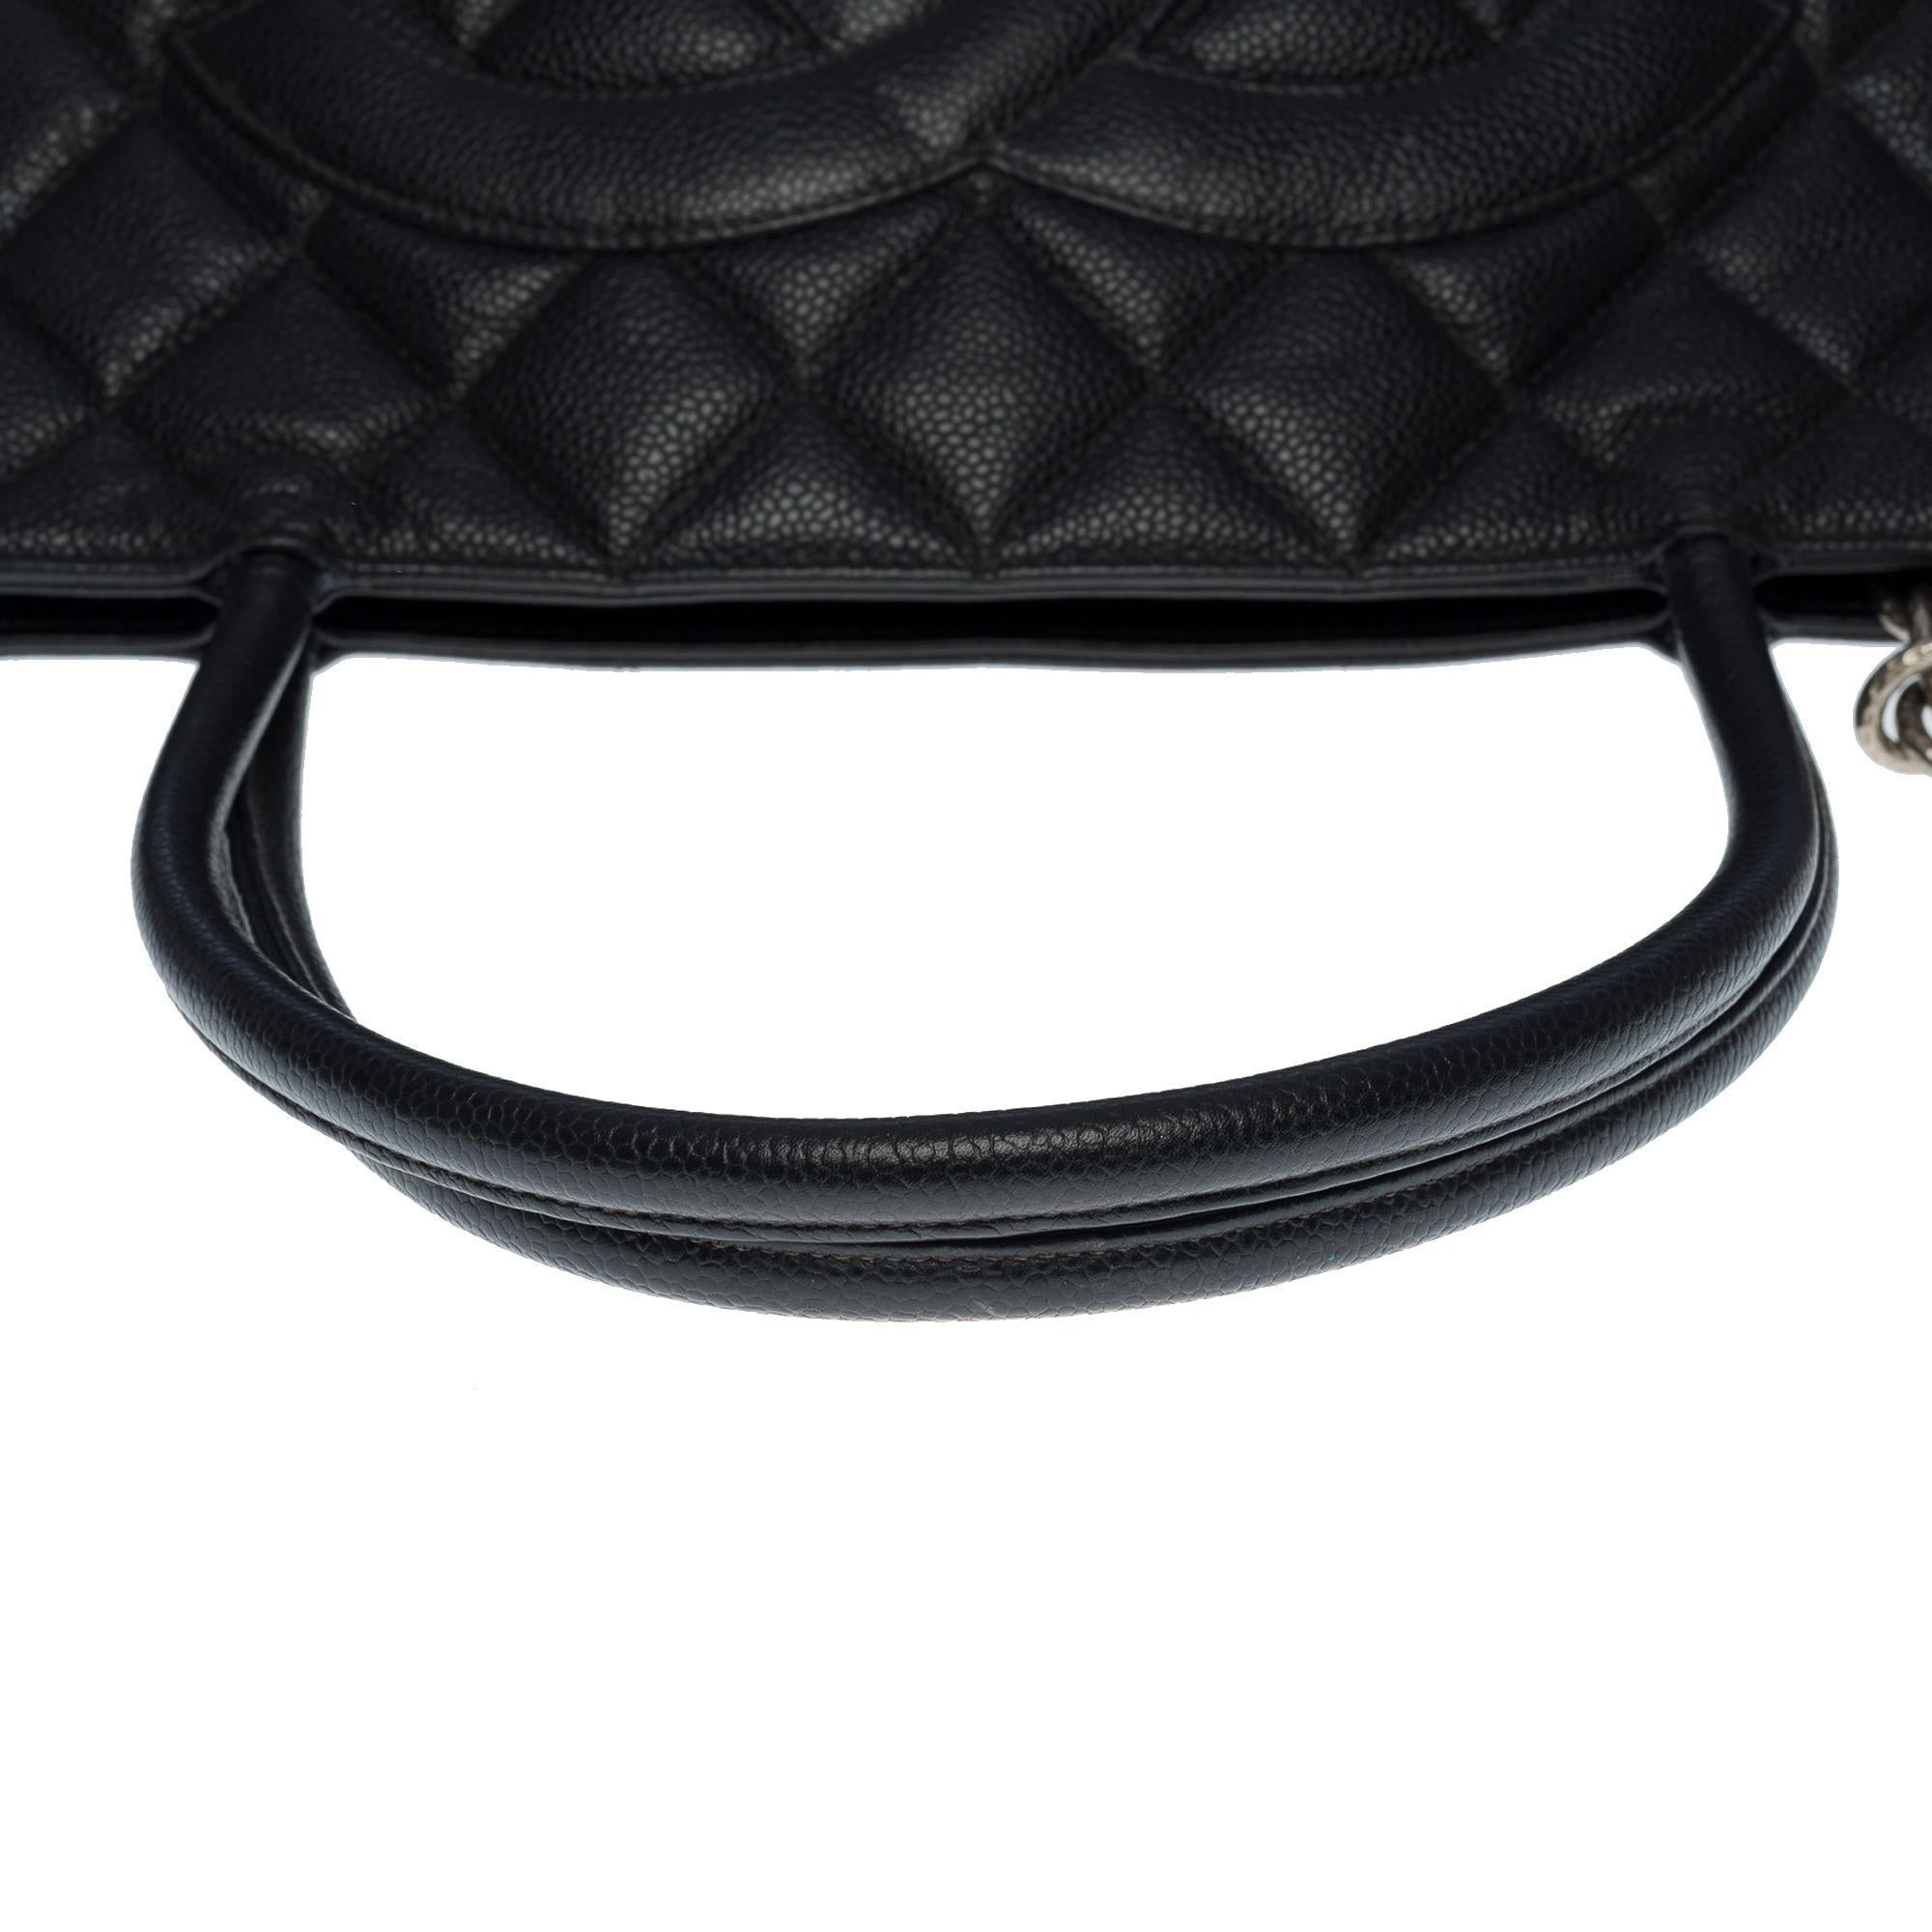 Beautiful Chanel Cabas Medallion bag in black caviar leather, SHW For Sale 2